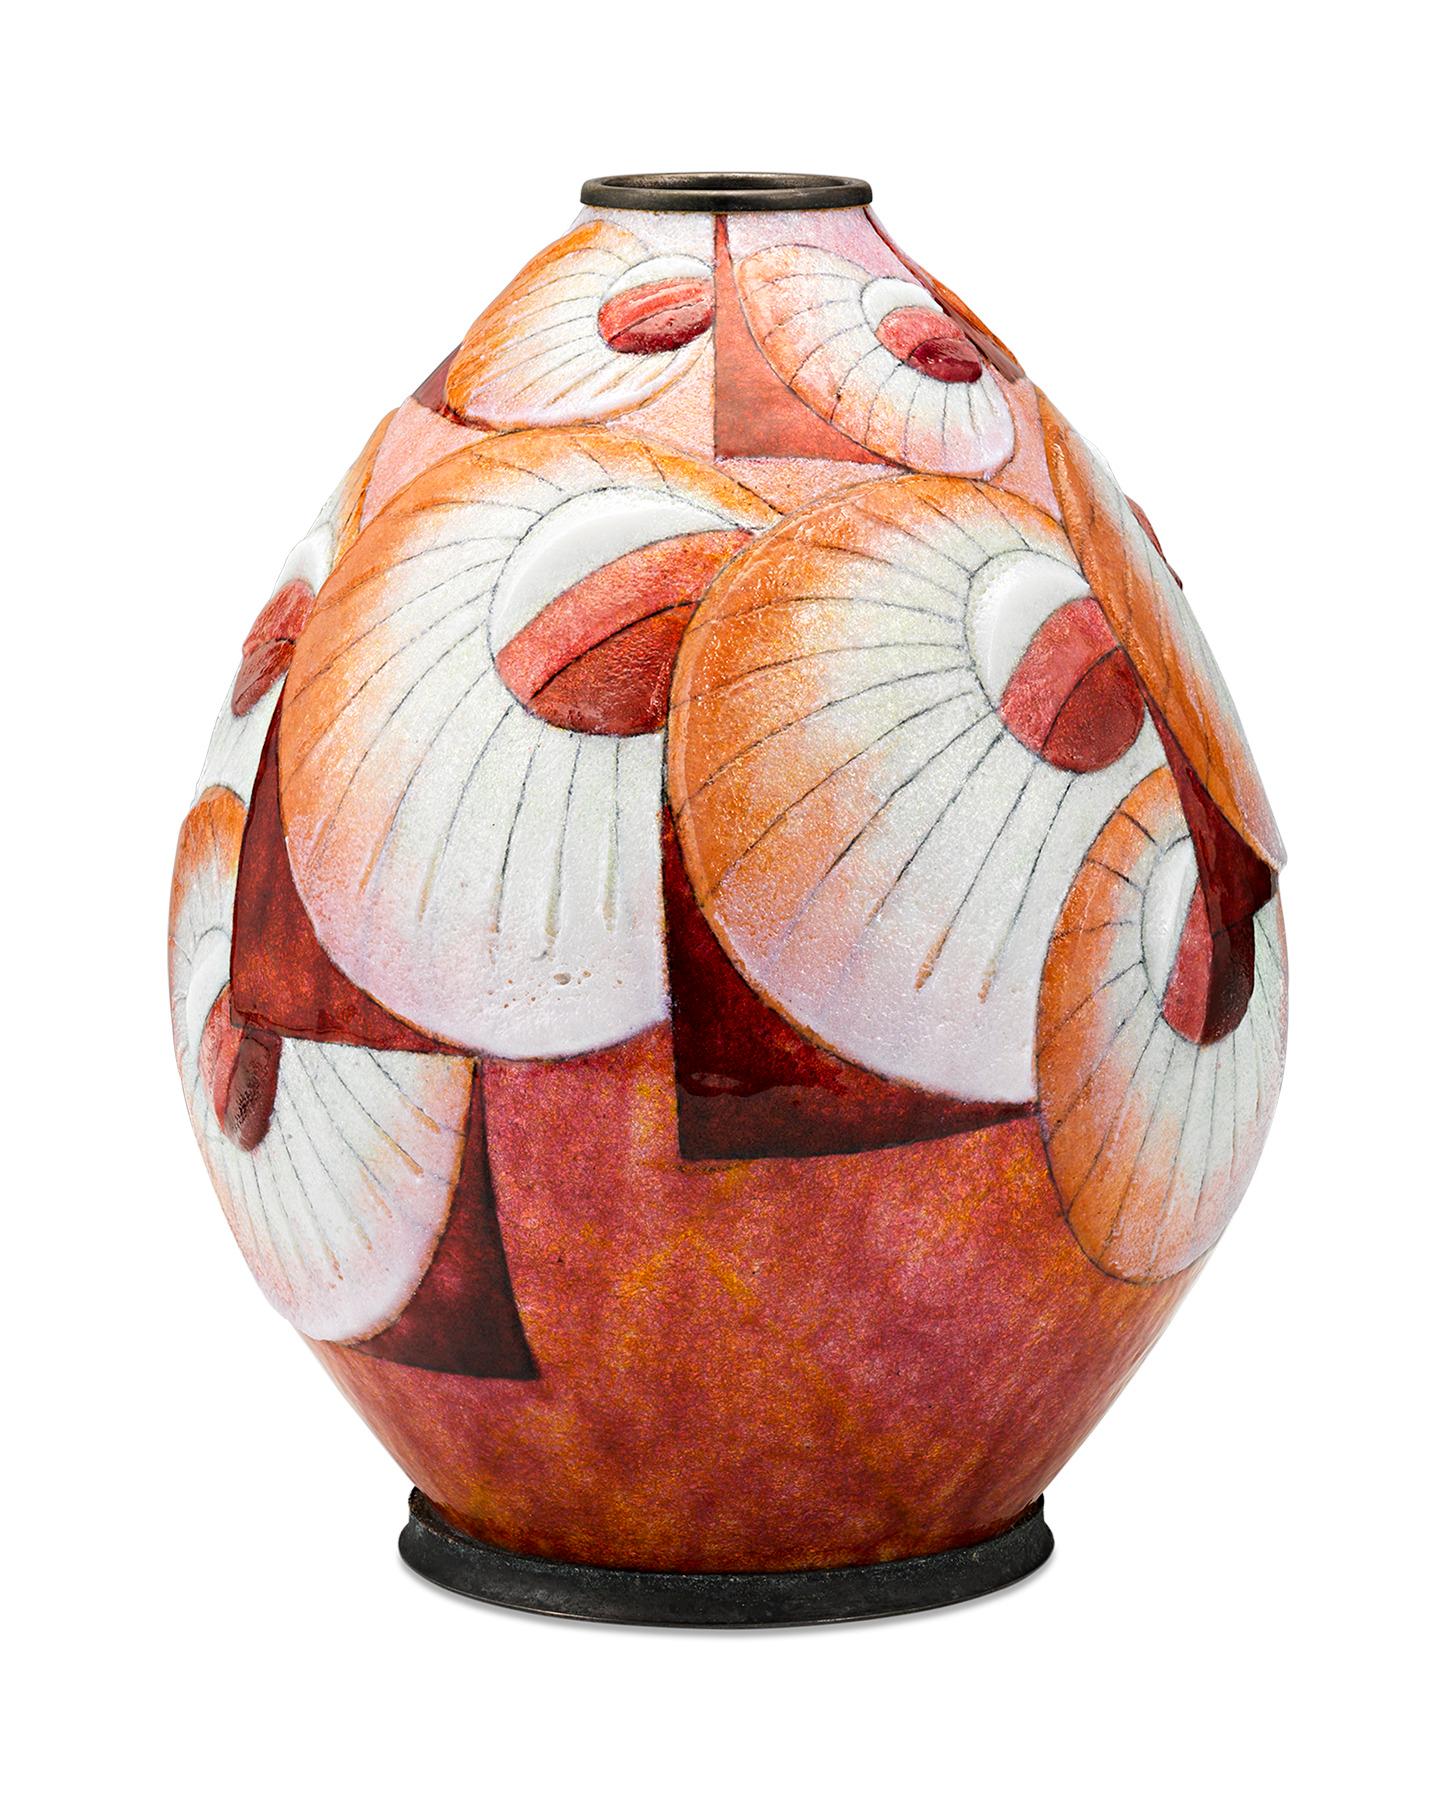 Decorated in bold lines and sunburst patterns, this Art Deco vase by Camille Fauré is crafted in the firm's signature style using colored enamel over a copper base. Fauré developed a technique of applying multiple layers of colorful enamel to copper